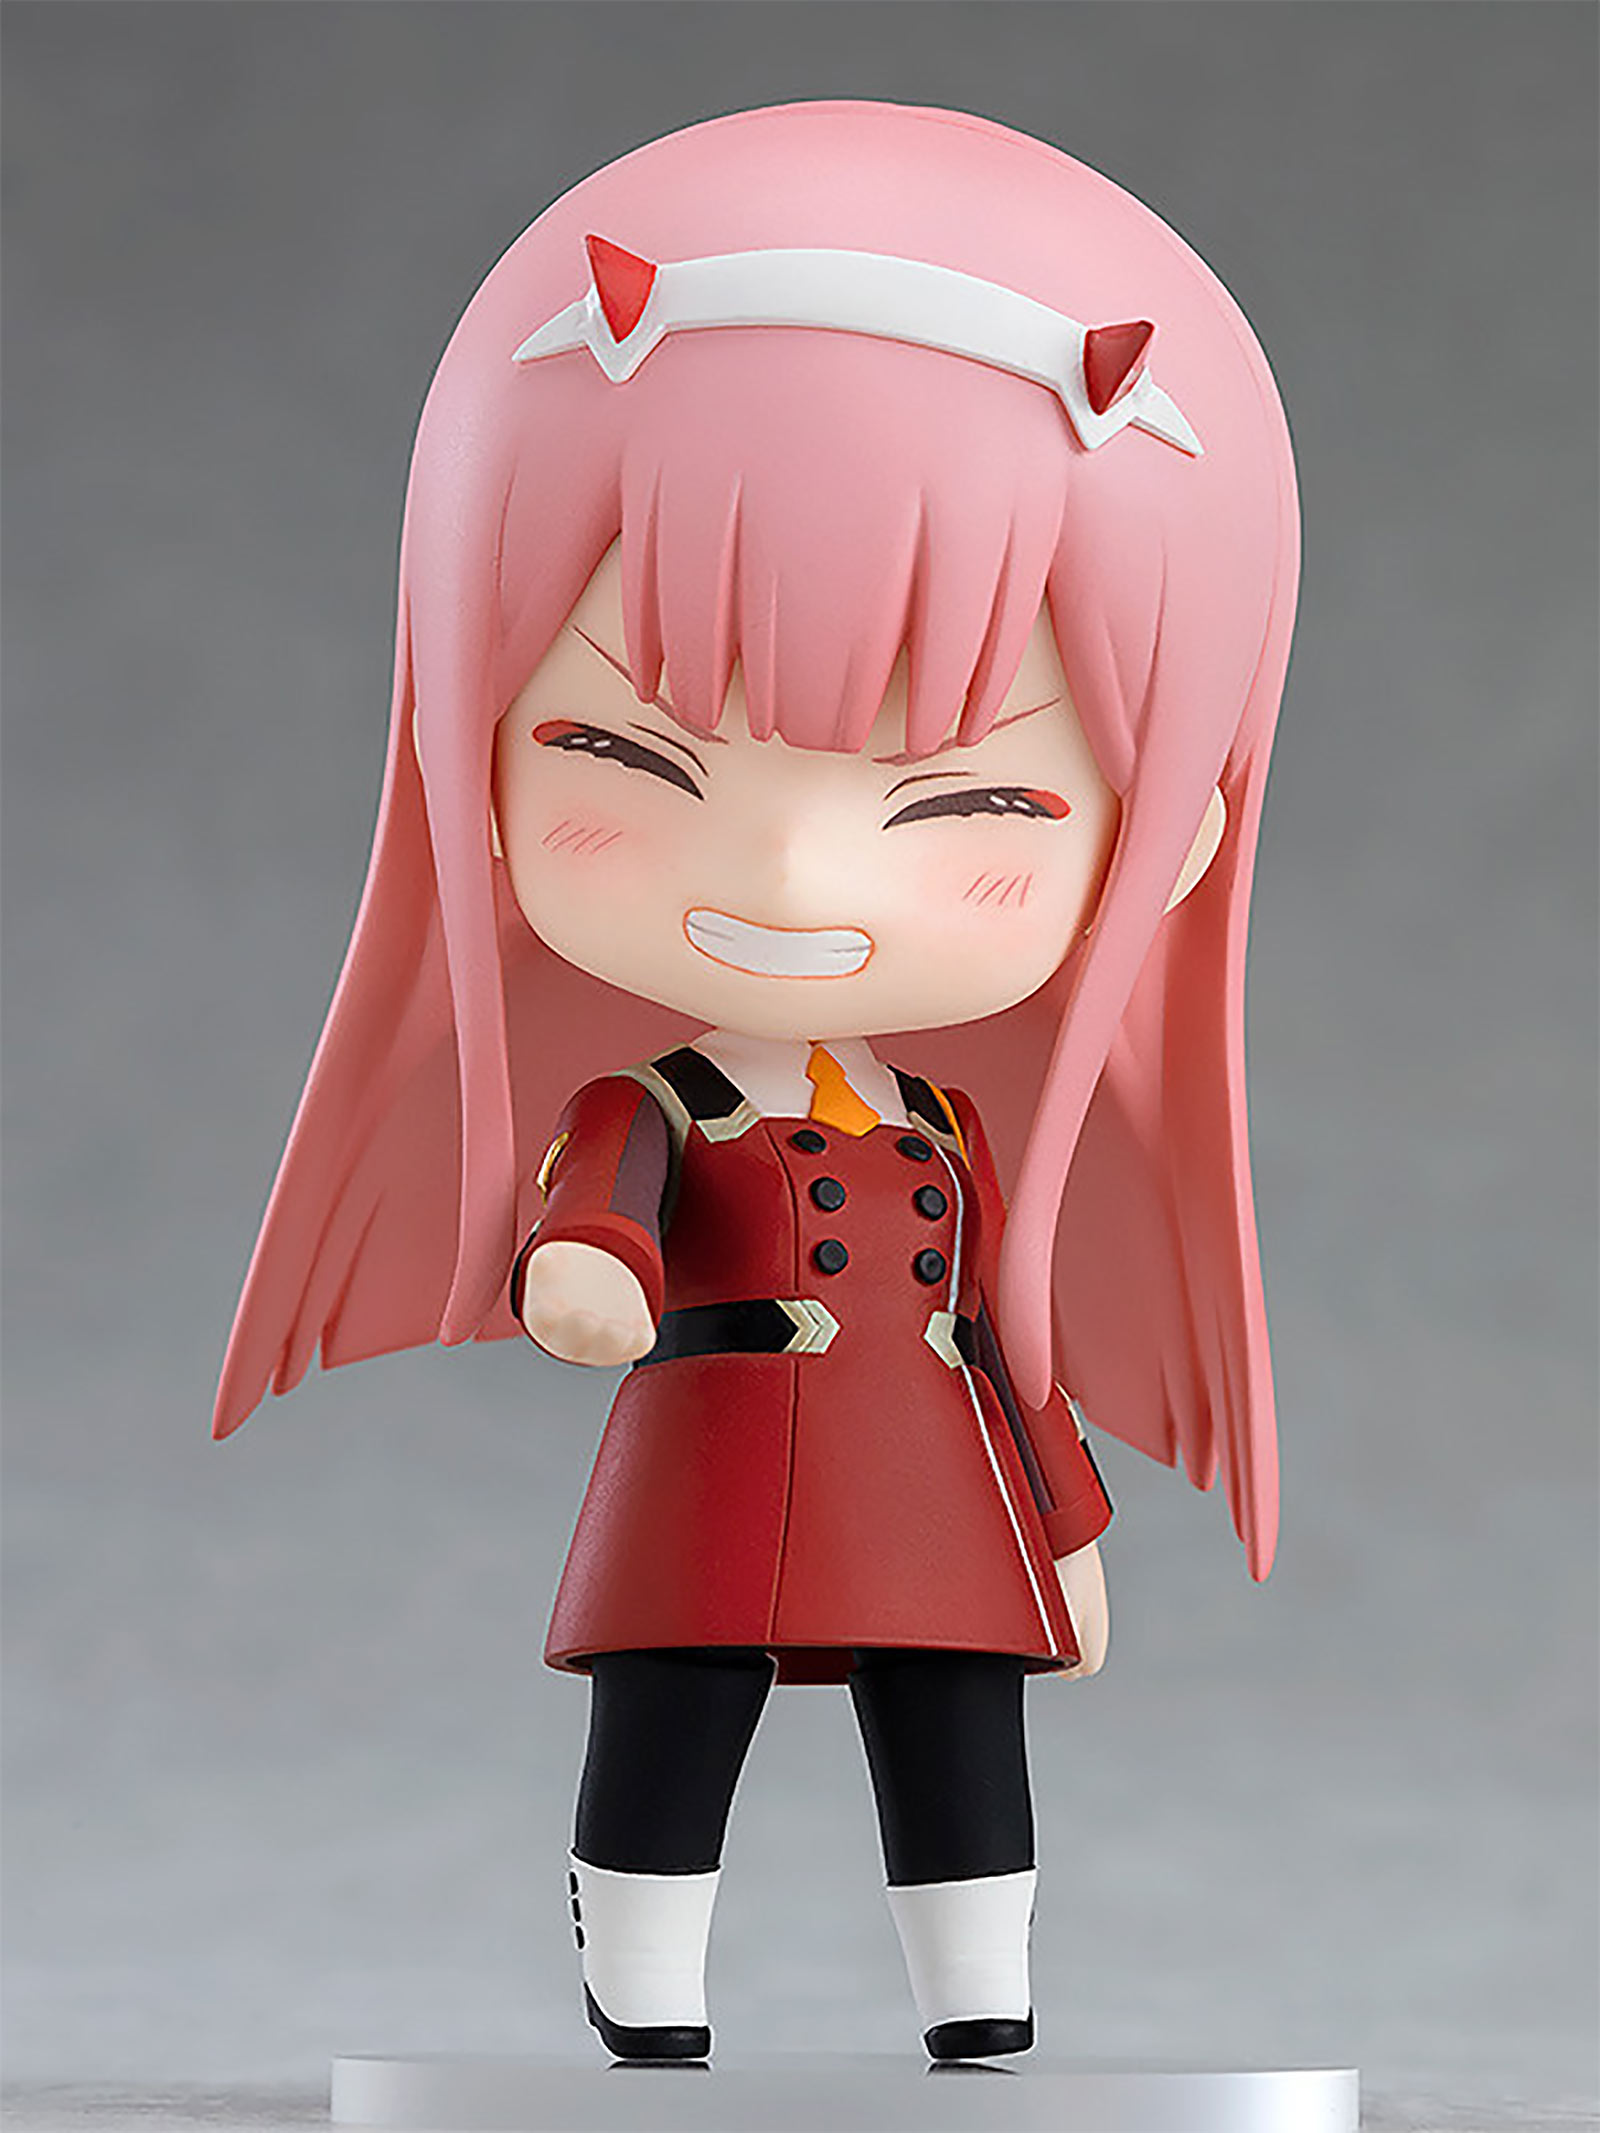 DARLING in the FRANXX - Zero Two Nendoroid Actionfigur